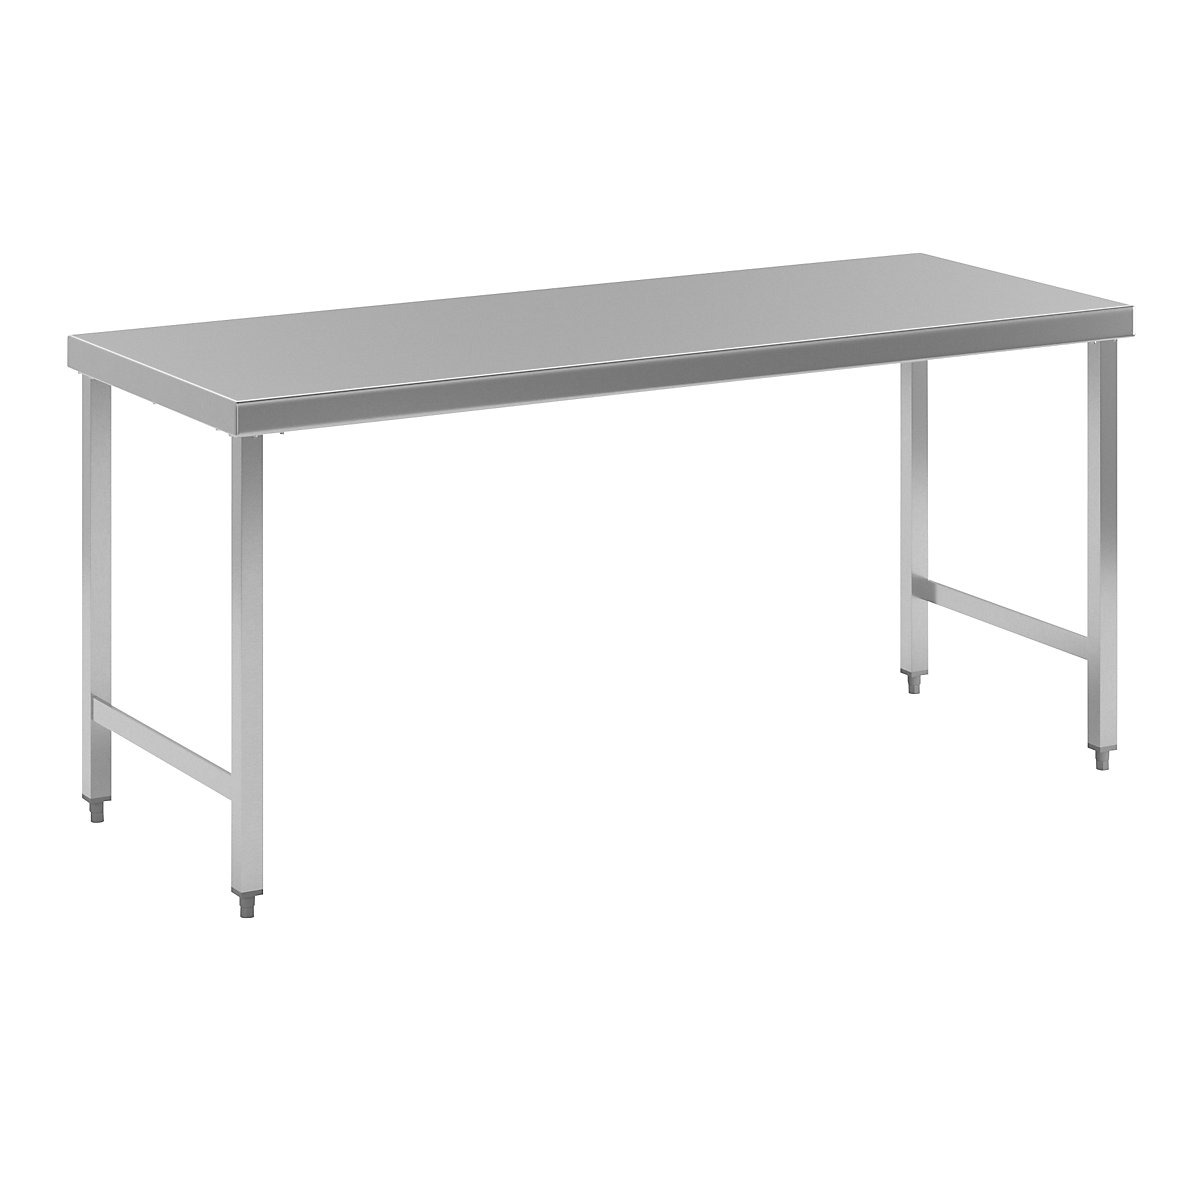 Stainless steel workbench, working height 850 mm, WxD 1800 x 700 mm, without shelf-11